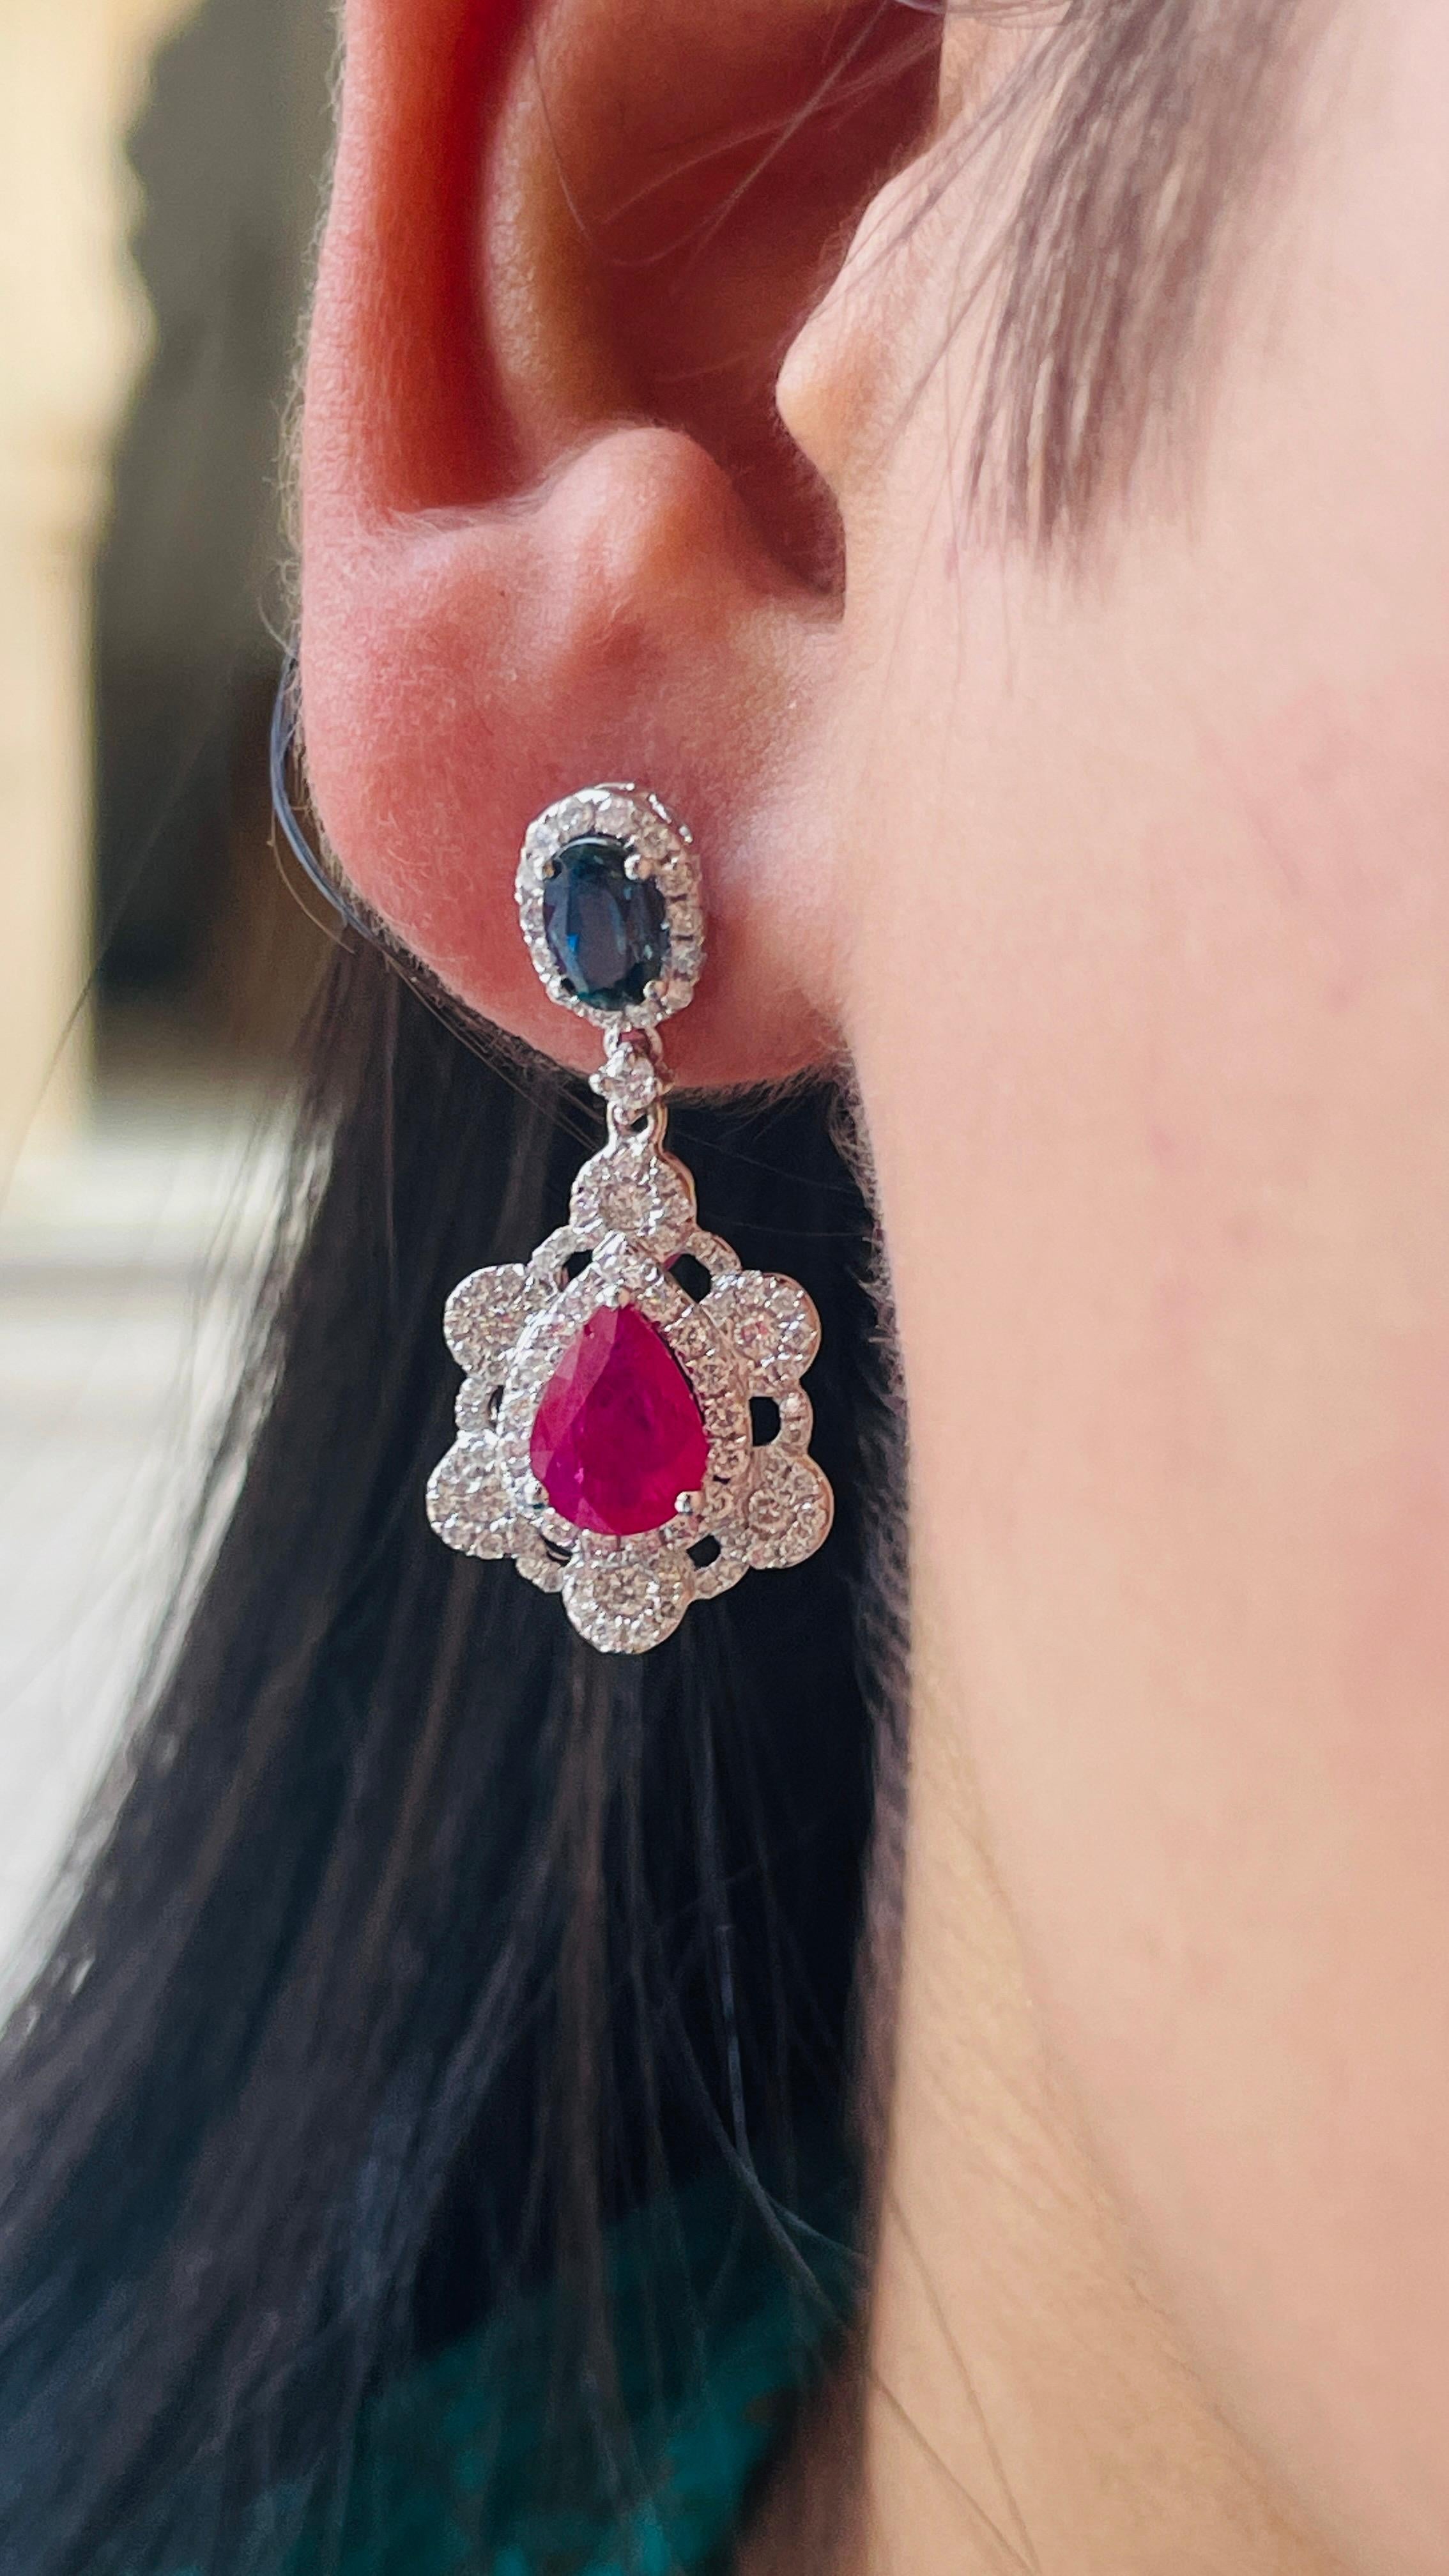 Oval Cut 3.85 Carat Blue Sapphire Ruby Dangle Earrings in 14K White Gold with Diamonds For Sale